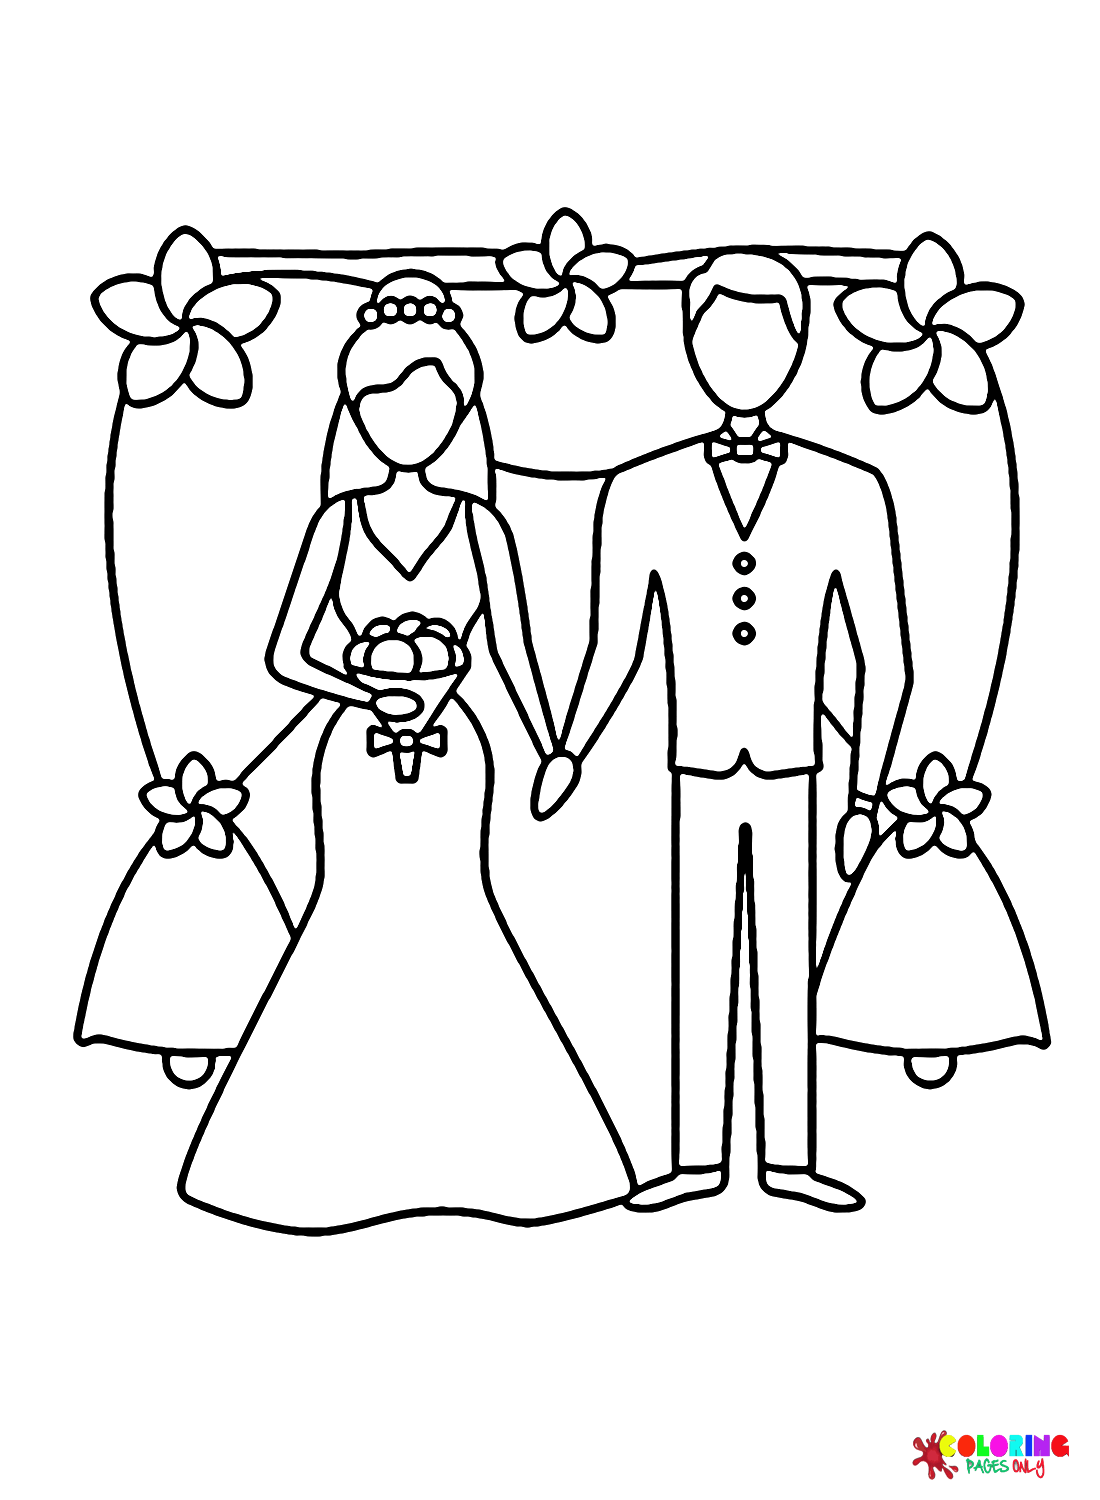 Bride and Groom Free Coloring Page